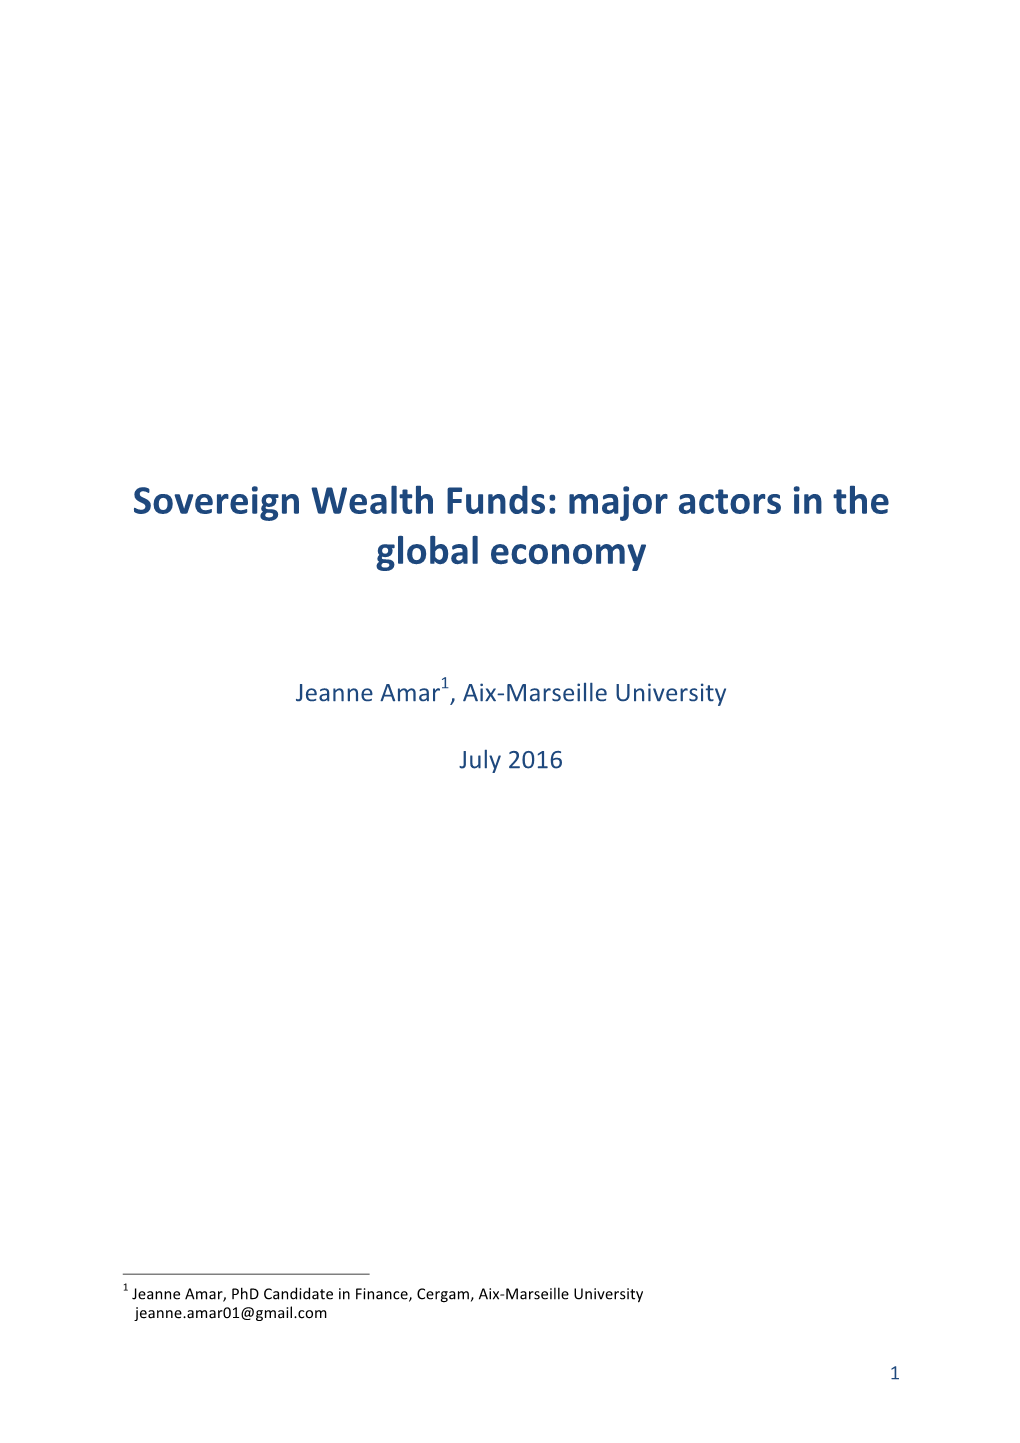 Sovereign Wealth Funds: Major Actors in the Global Economy